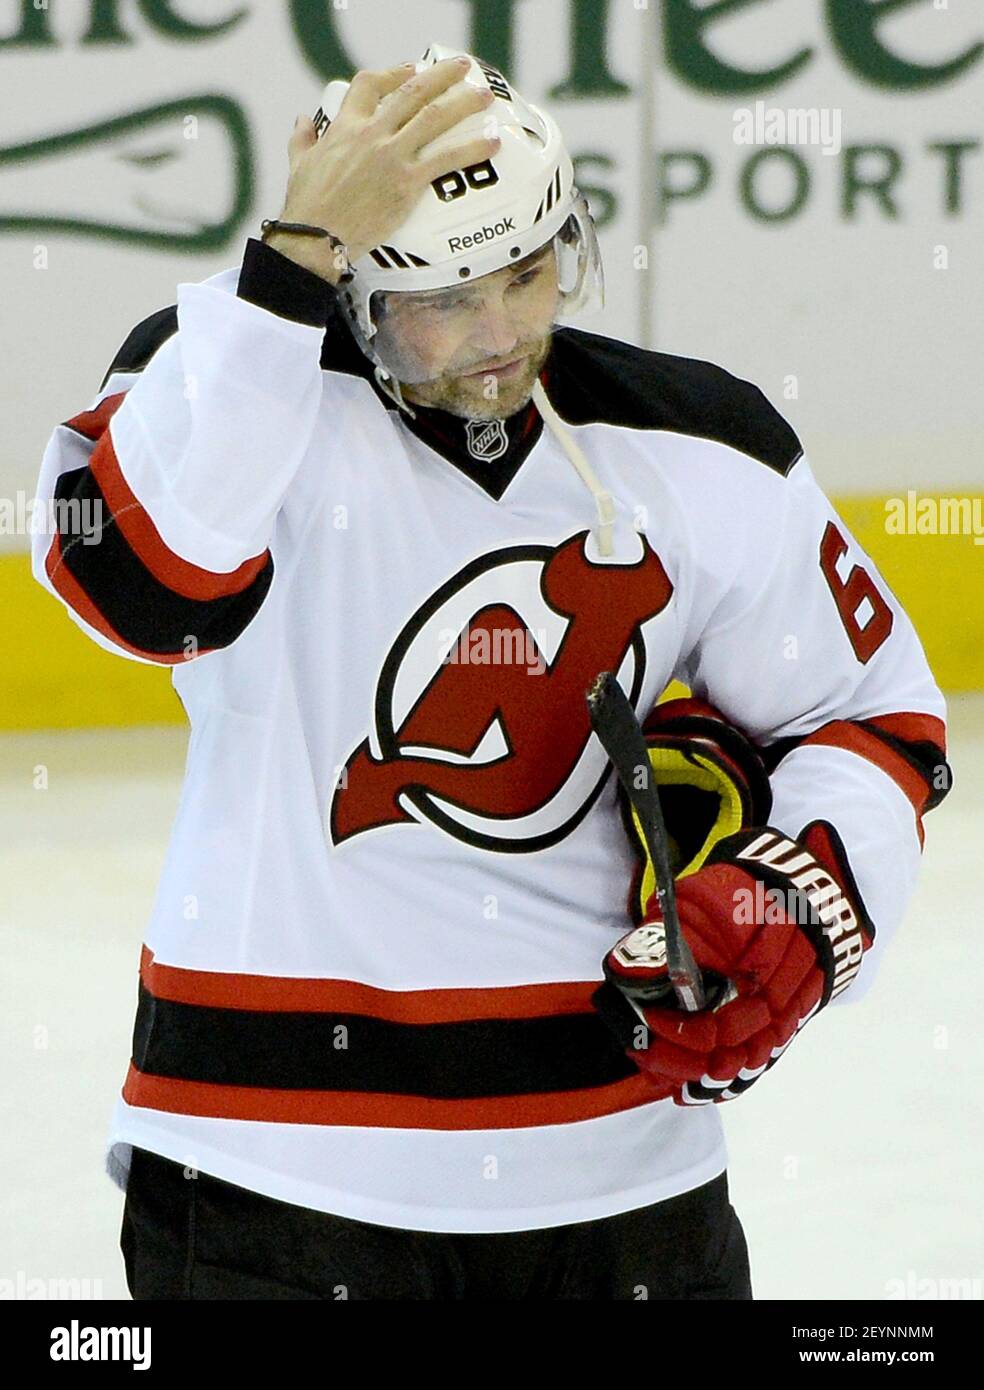 New Jersey Devils right wing Jaromir Jagr (68) warms up before the game  against the Washington Capitals at the Verizon Center in Washington,  Saturday, Dec. 21, 2013. Jagr is among the Czech